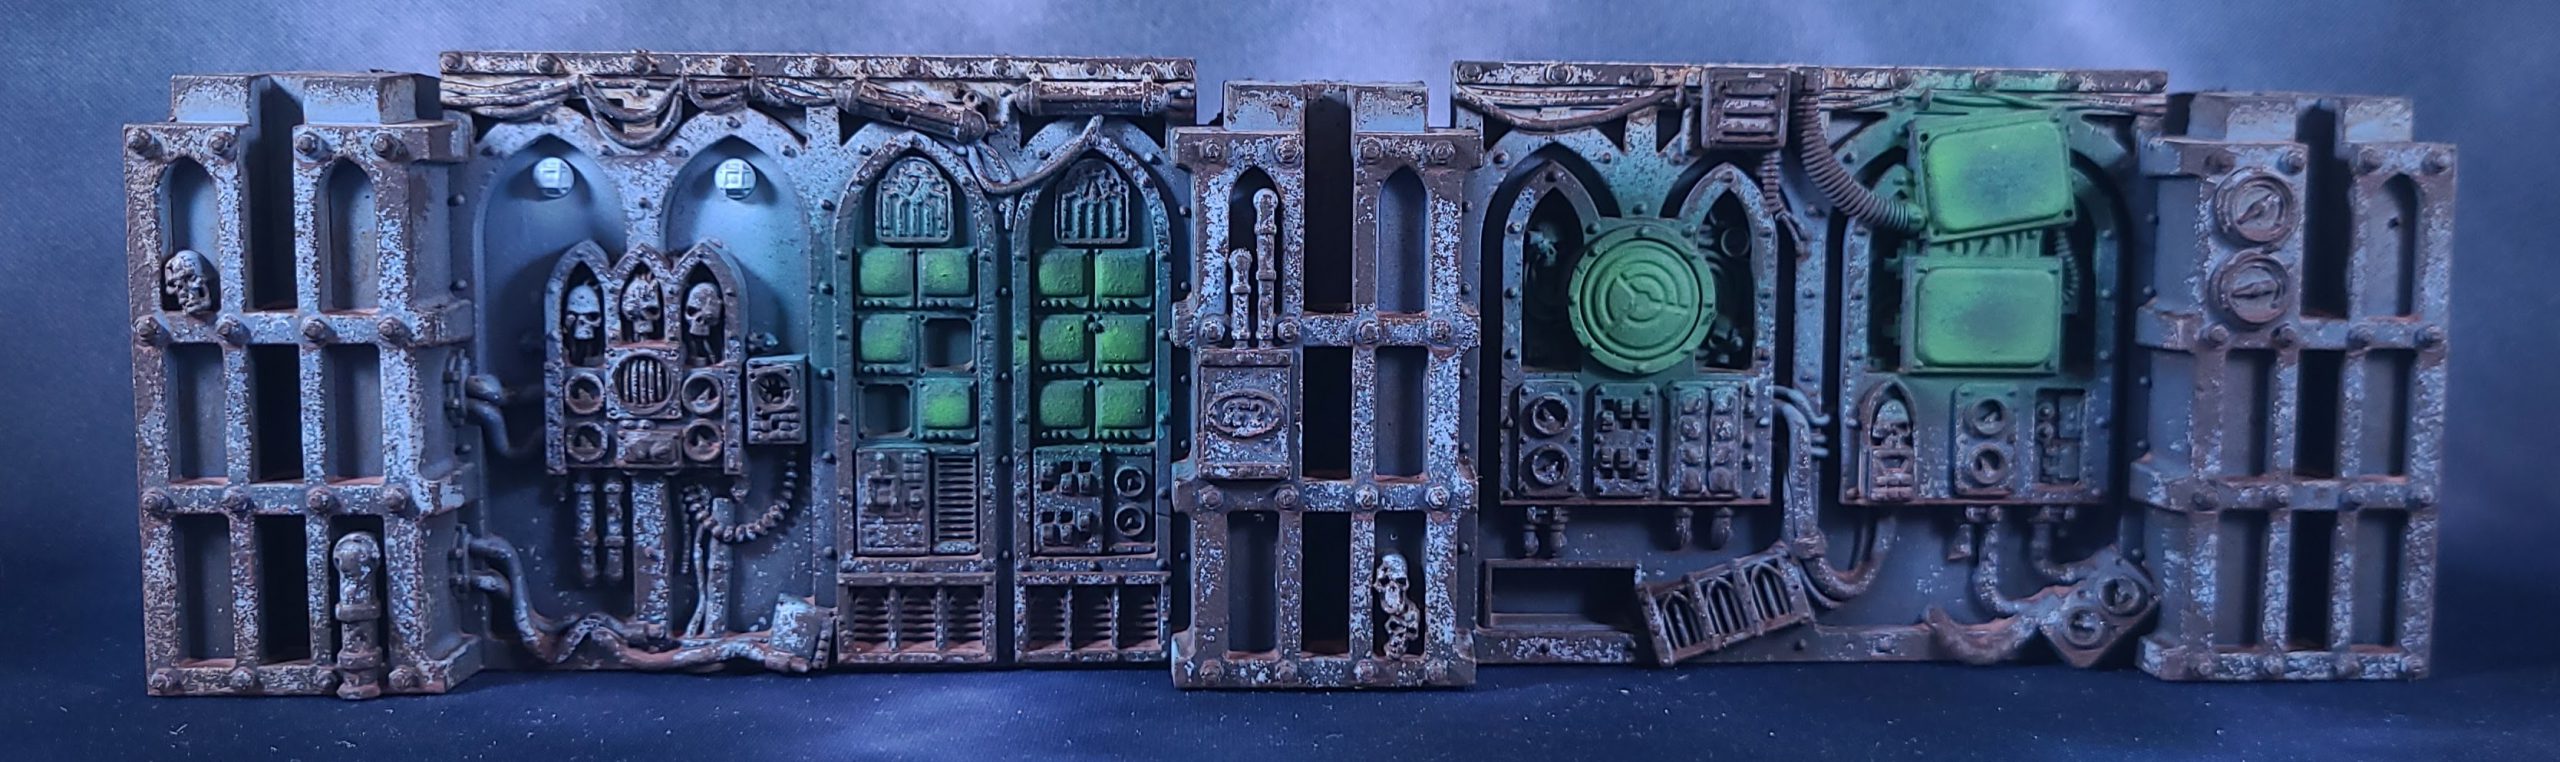 Terrain: best painted with friends